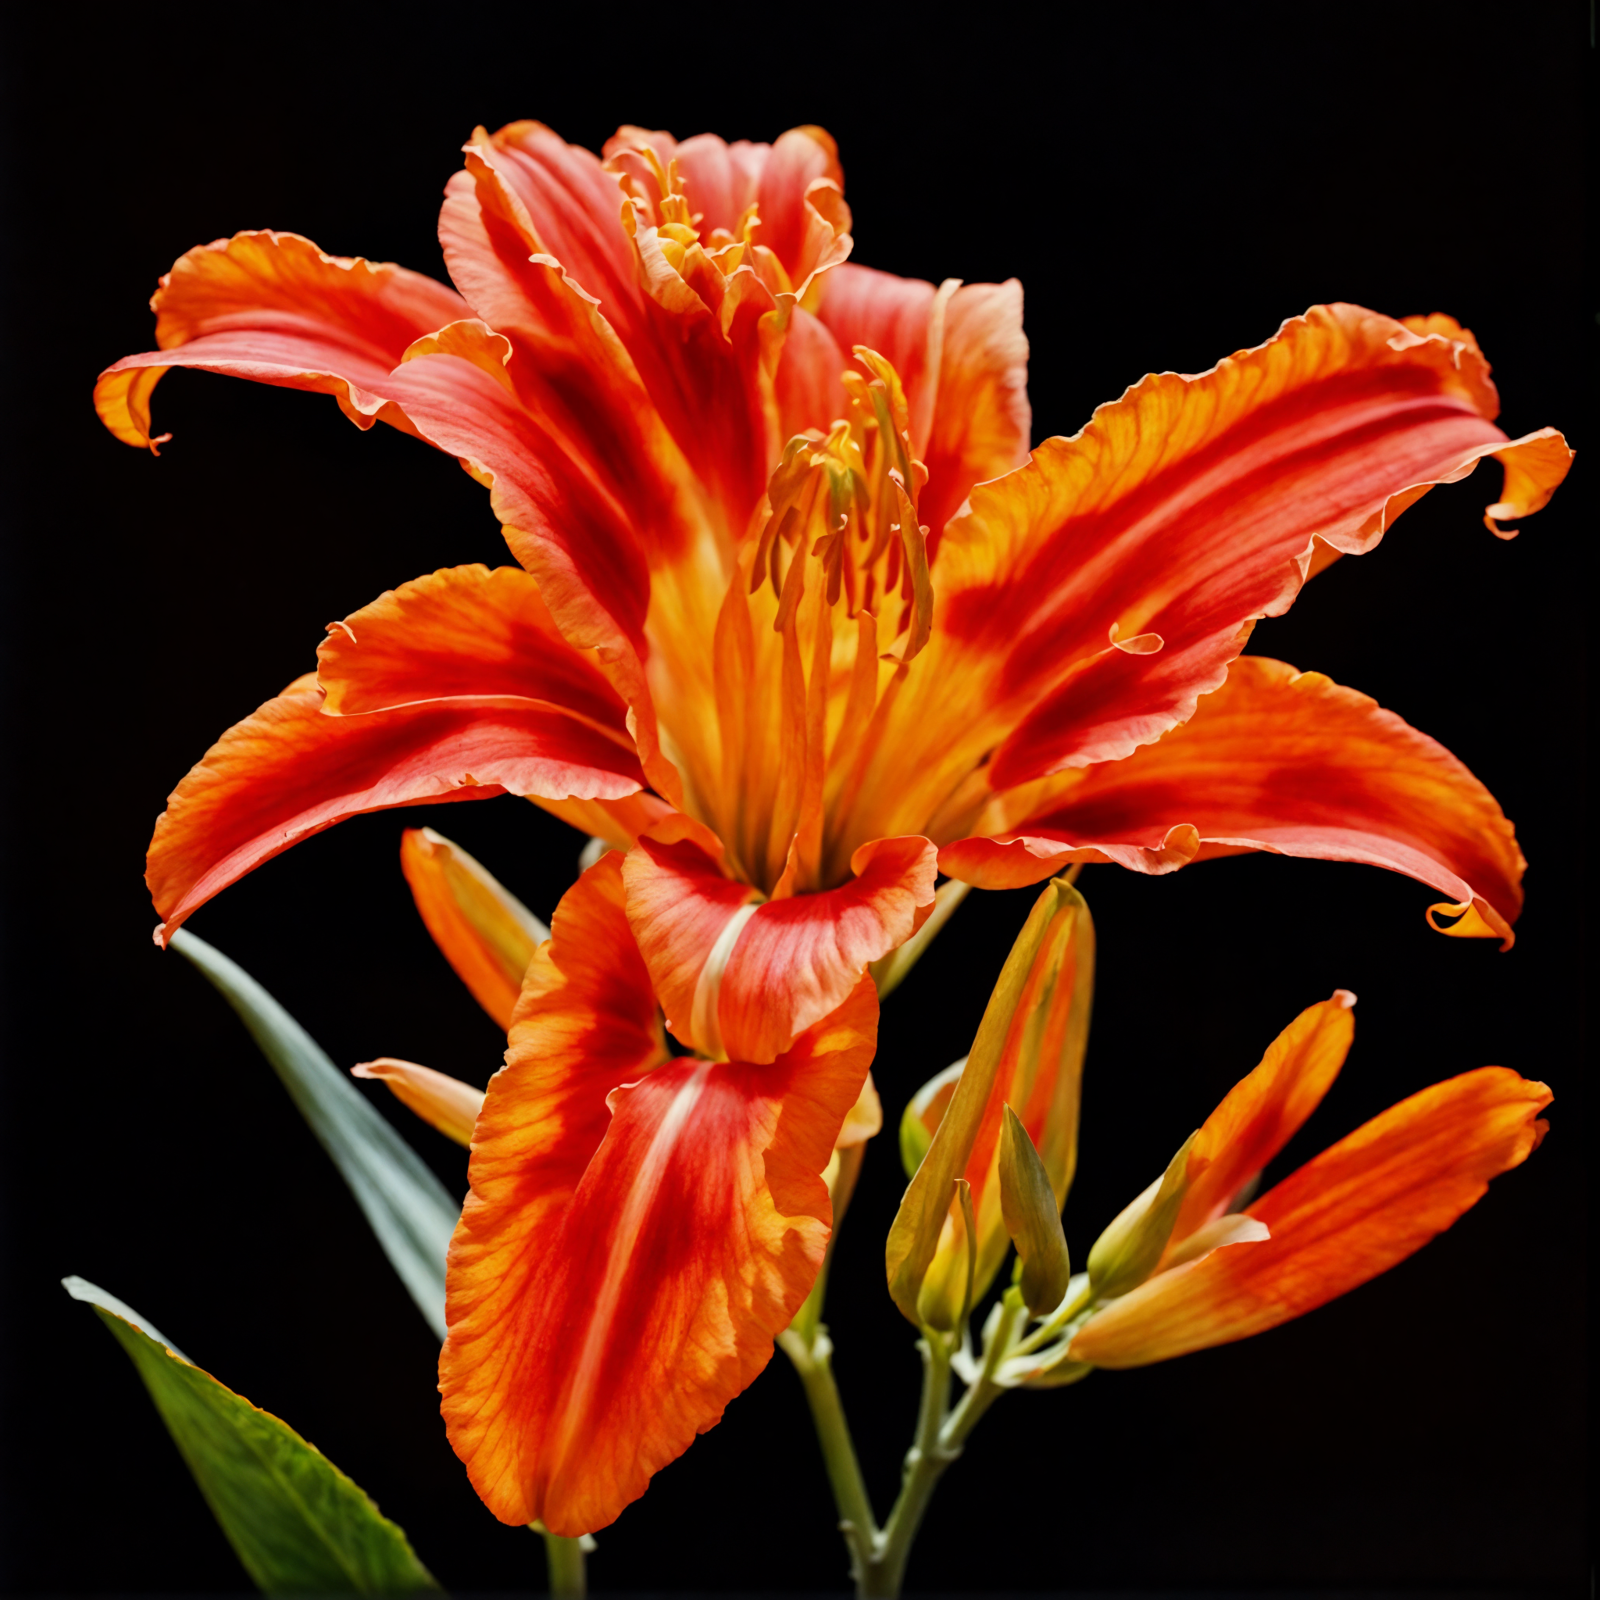 A single, detailed Hemerocallis fulva (daylily) on a dark background, centered and isolated.